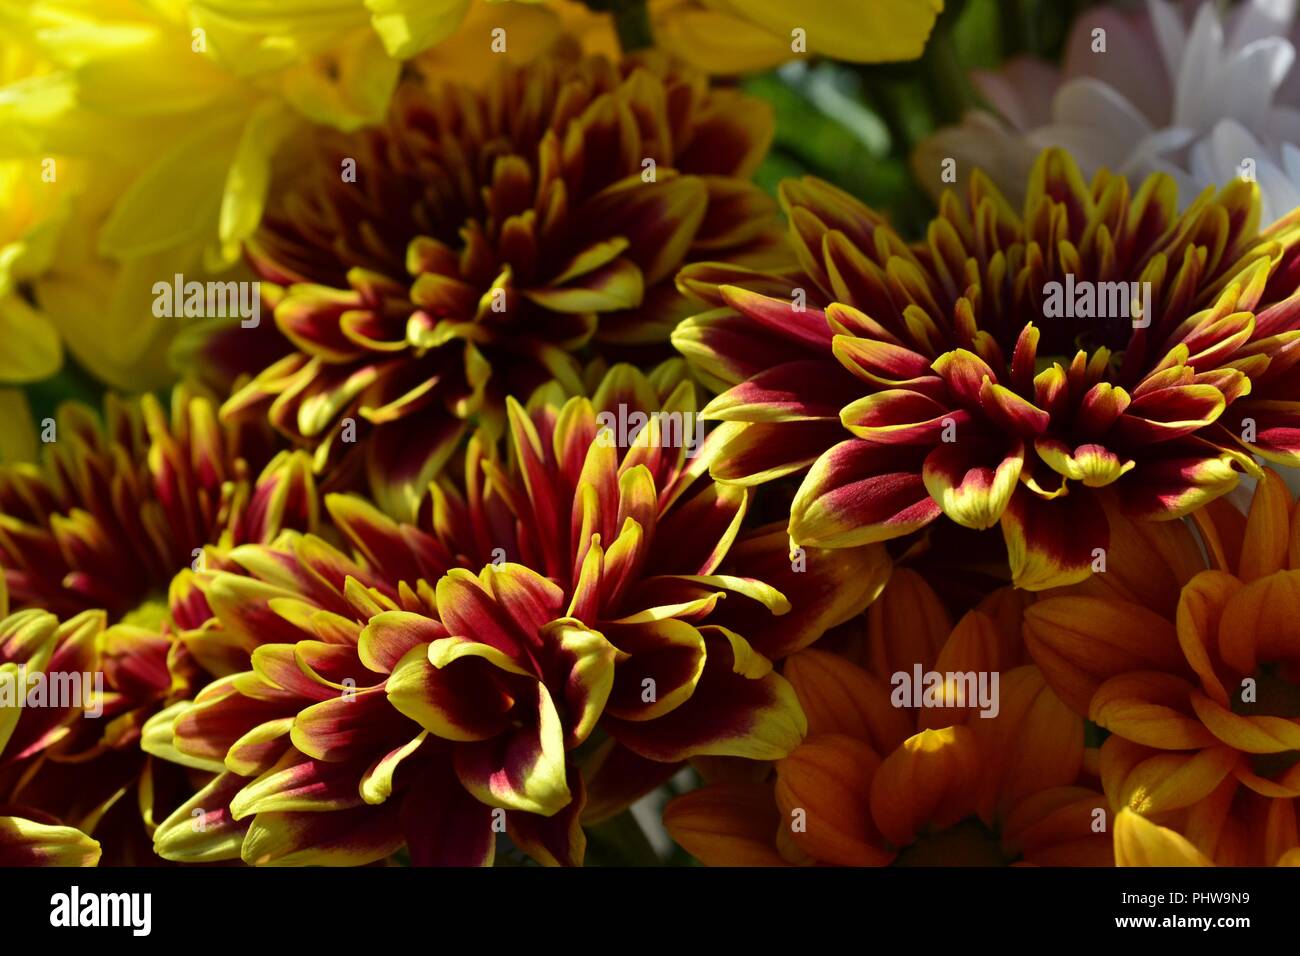 Striking close-up image of colourful Chrysanthemums in full bloom, naturally lit by the summer sun. Stock Photo